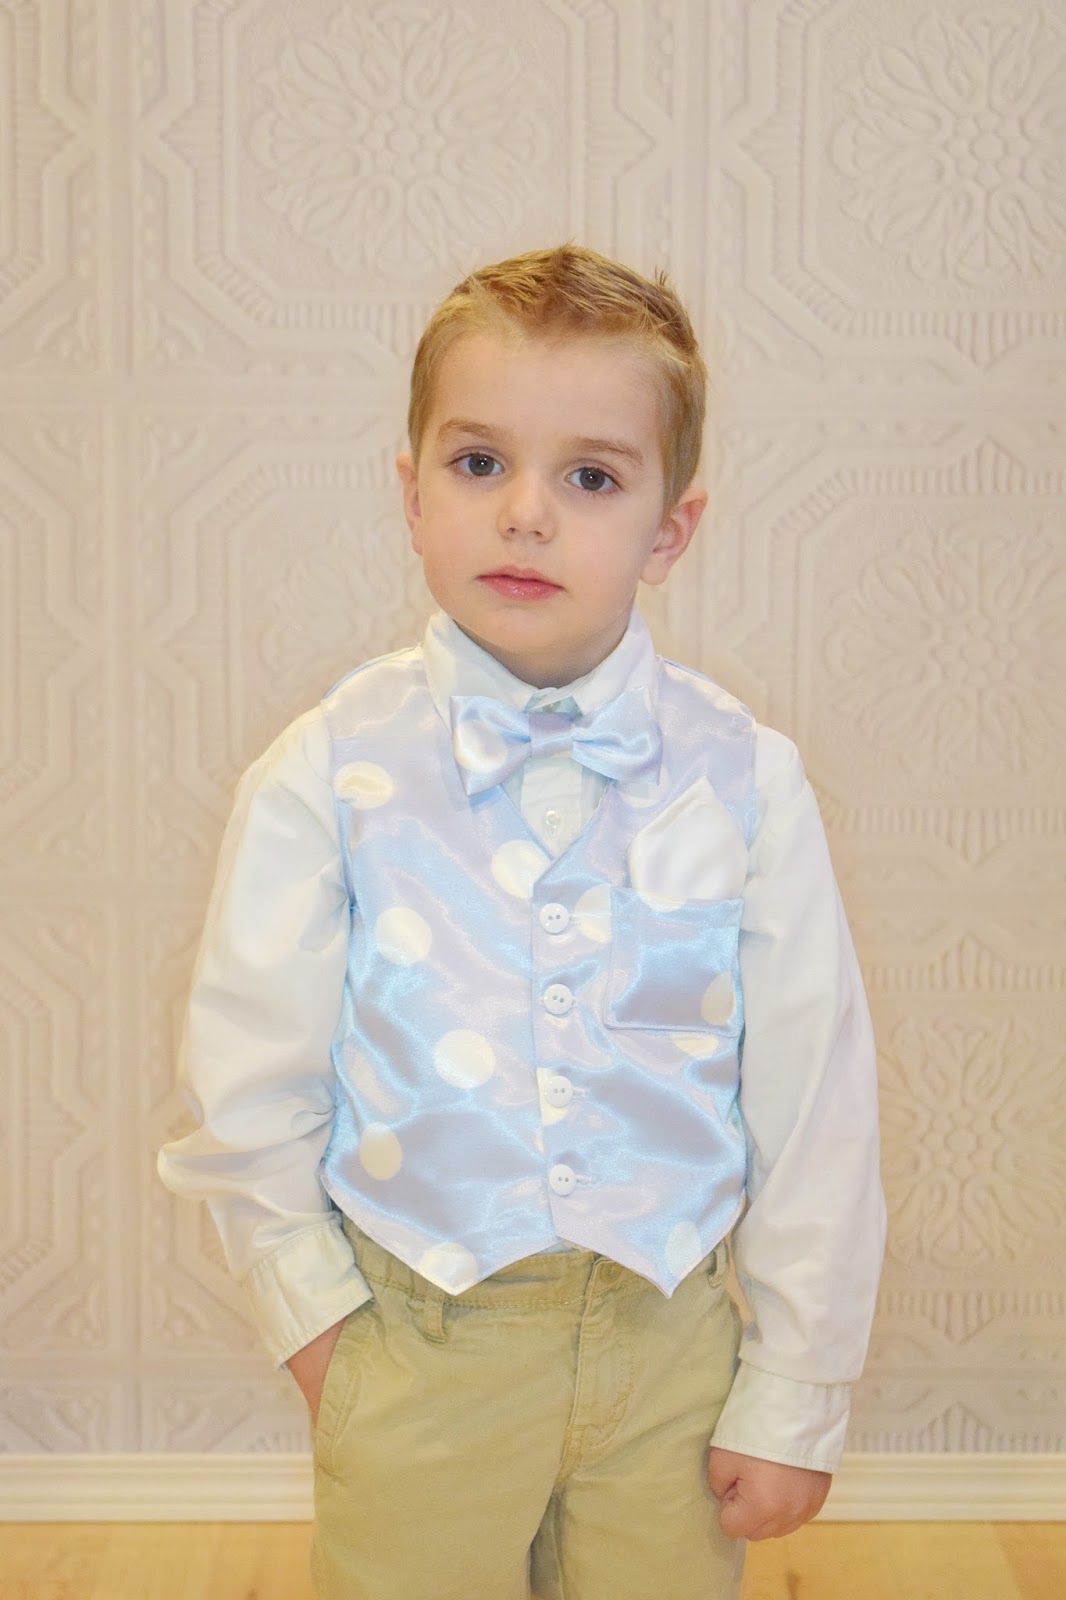 Create Kids Couture: Adding a Vest Pocket and Pocket Square